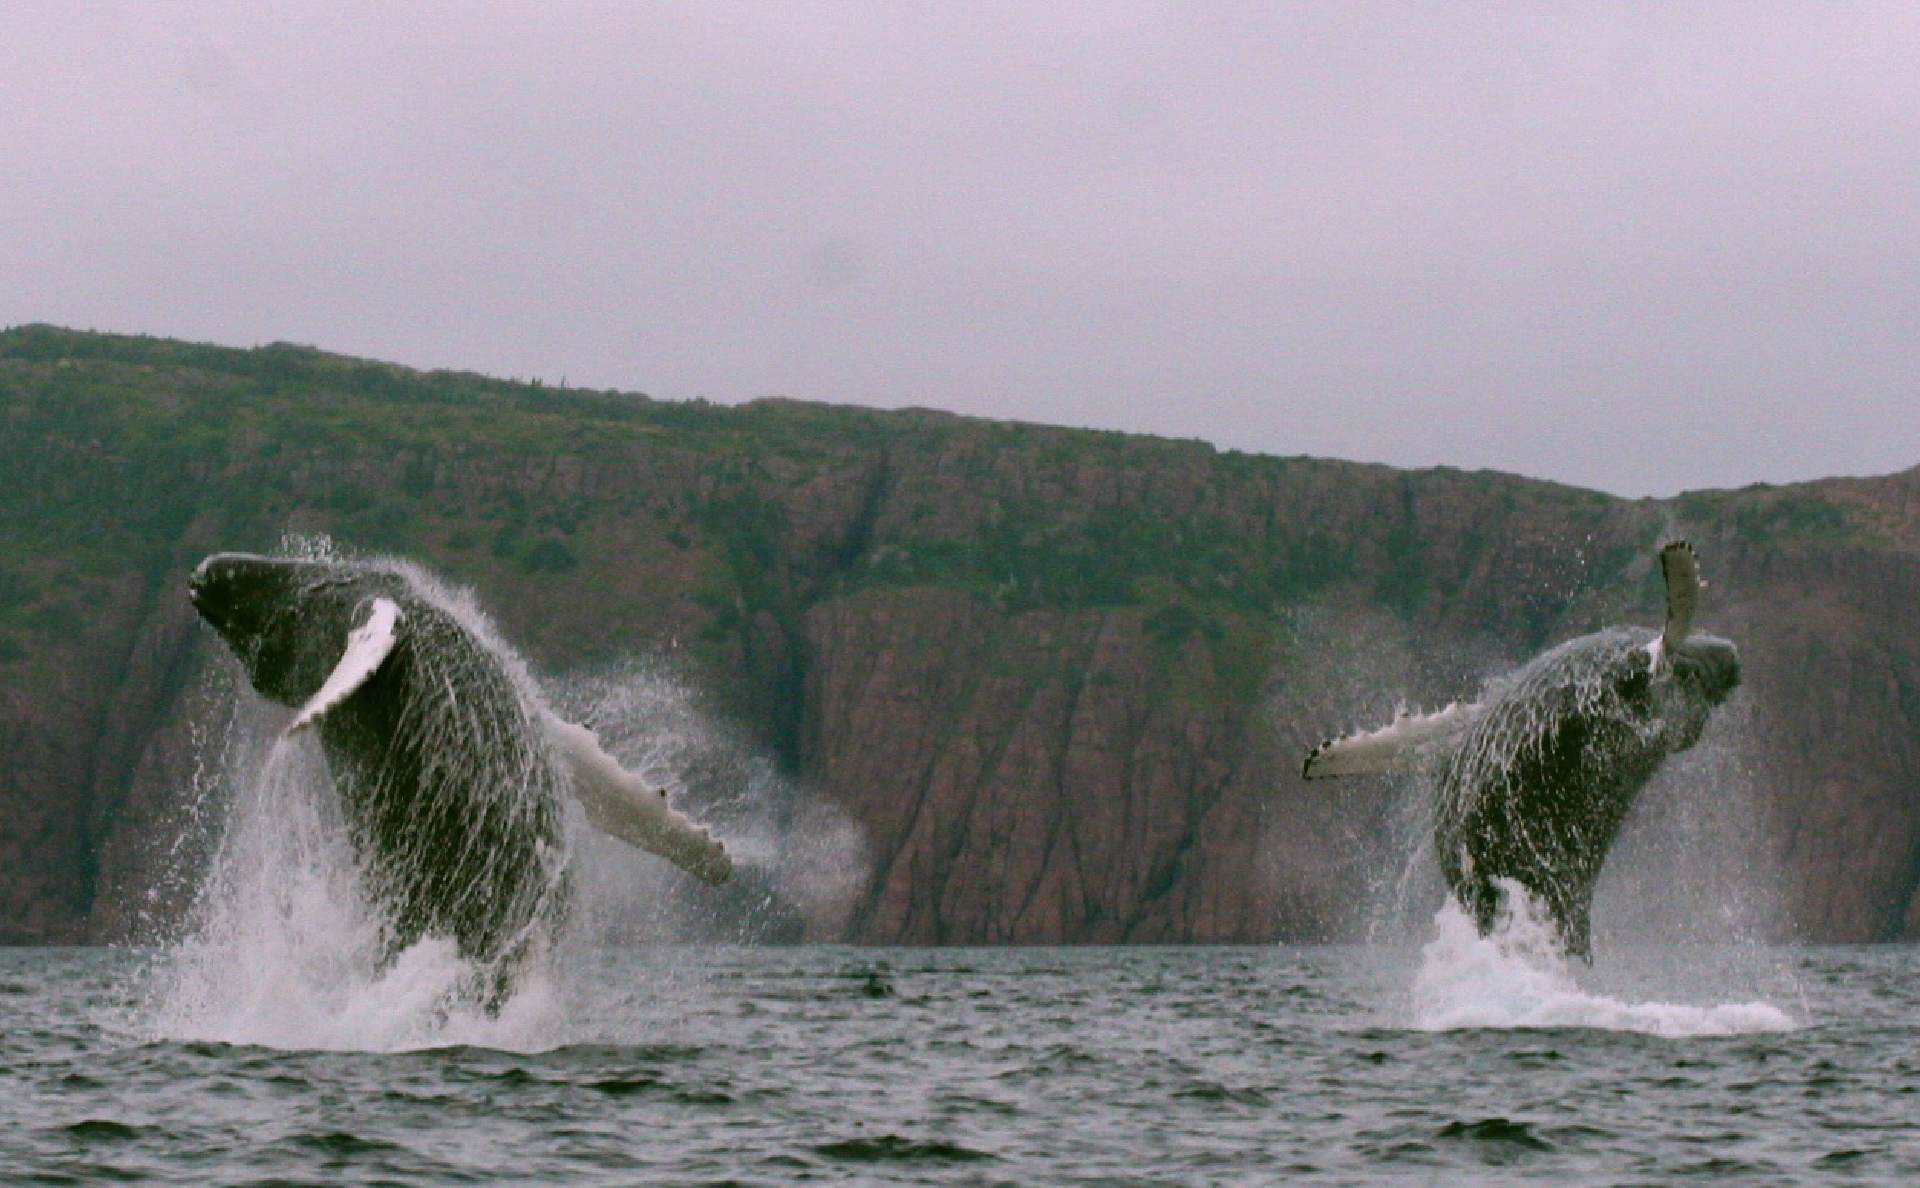 Two whales flipped out of the ocean